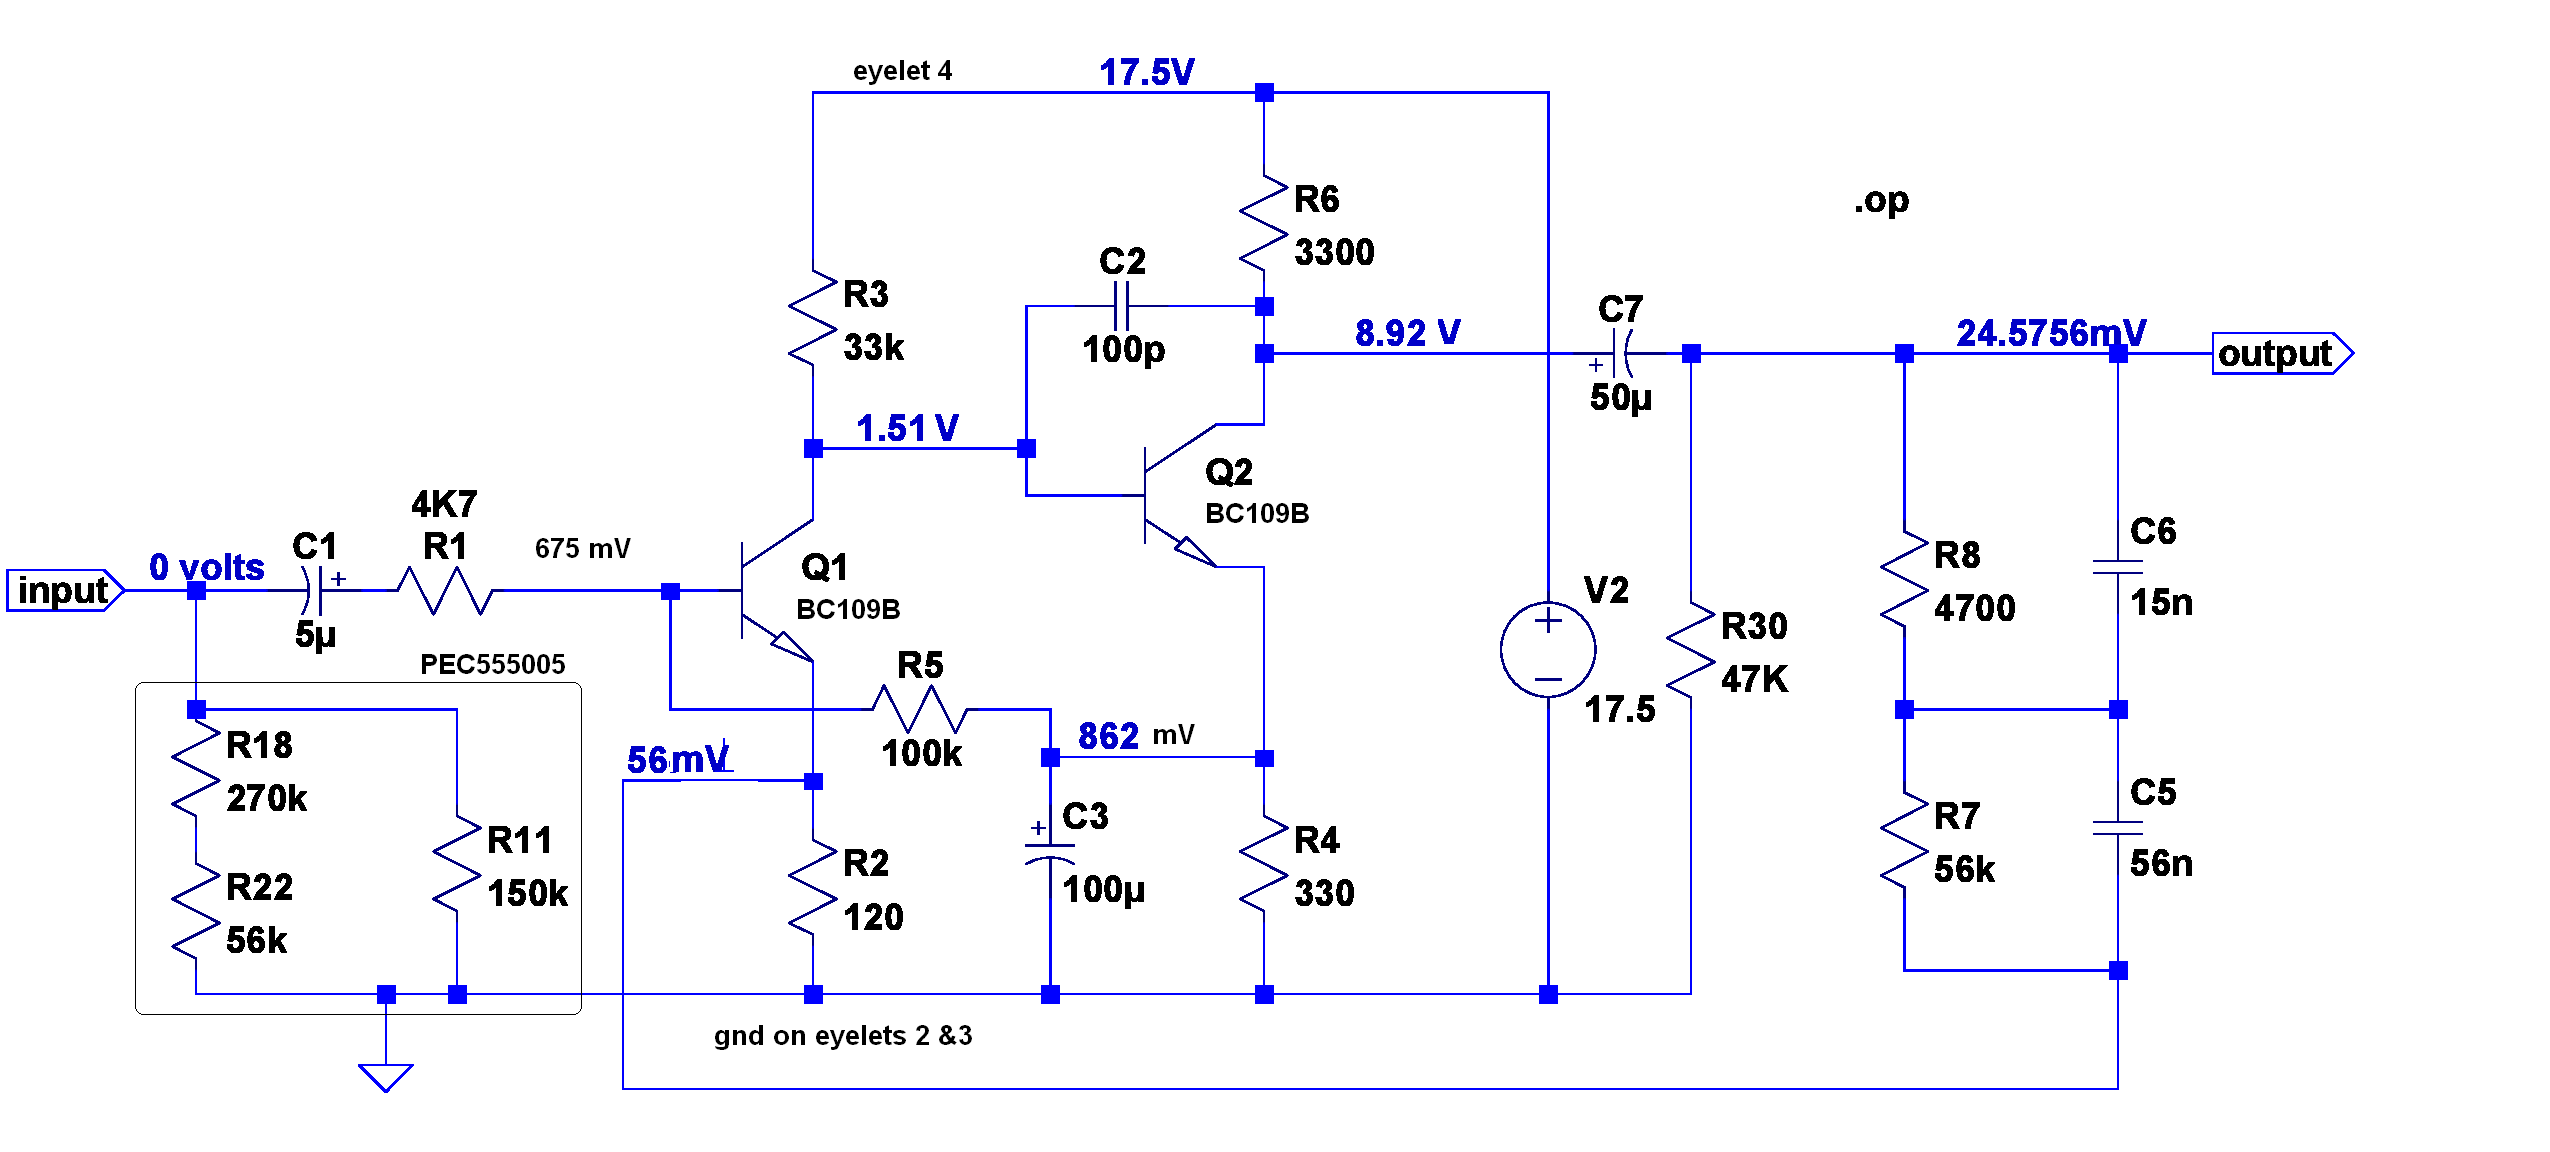 phono preamp schematic with DC bias voltages annotated